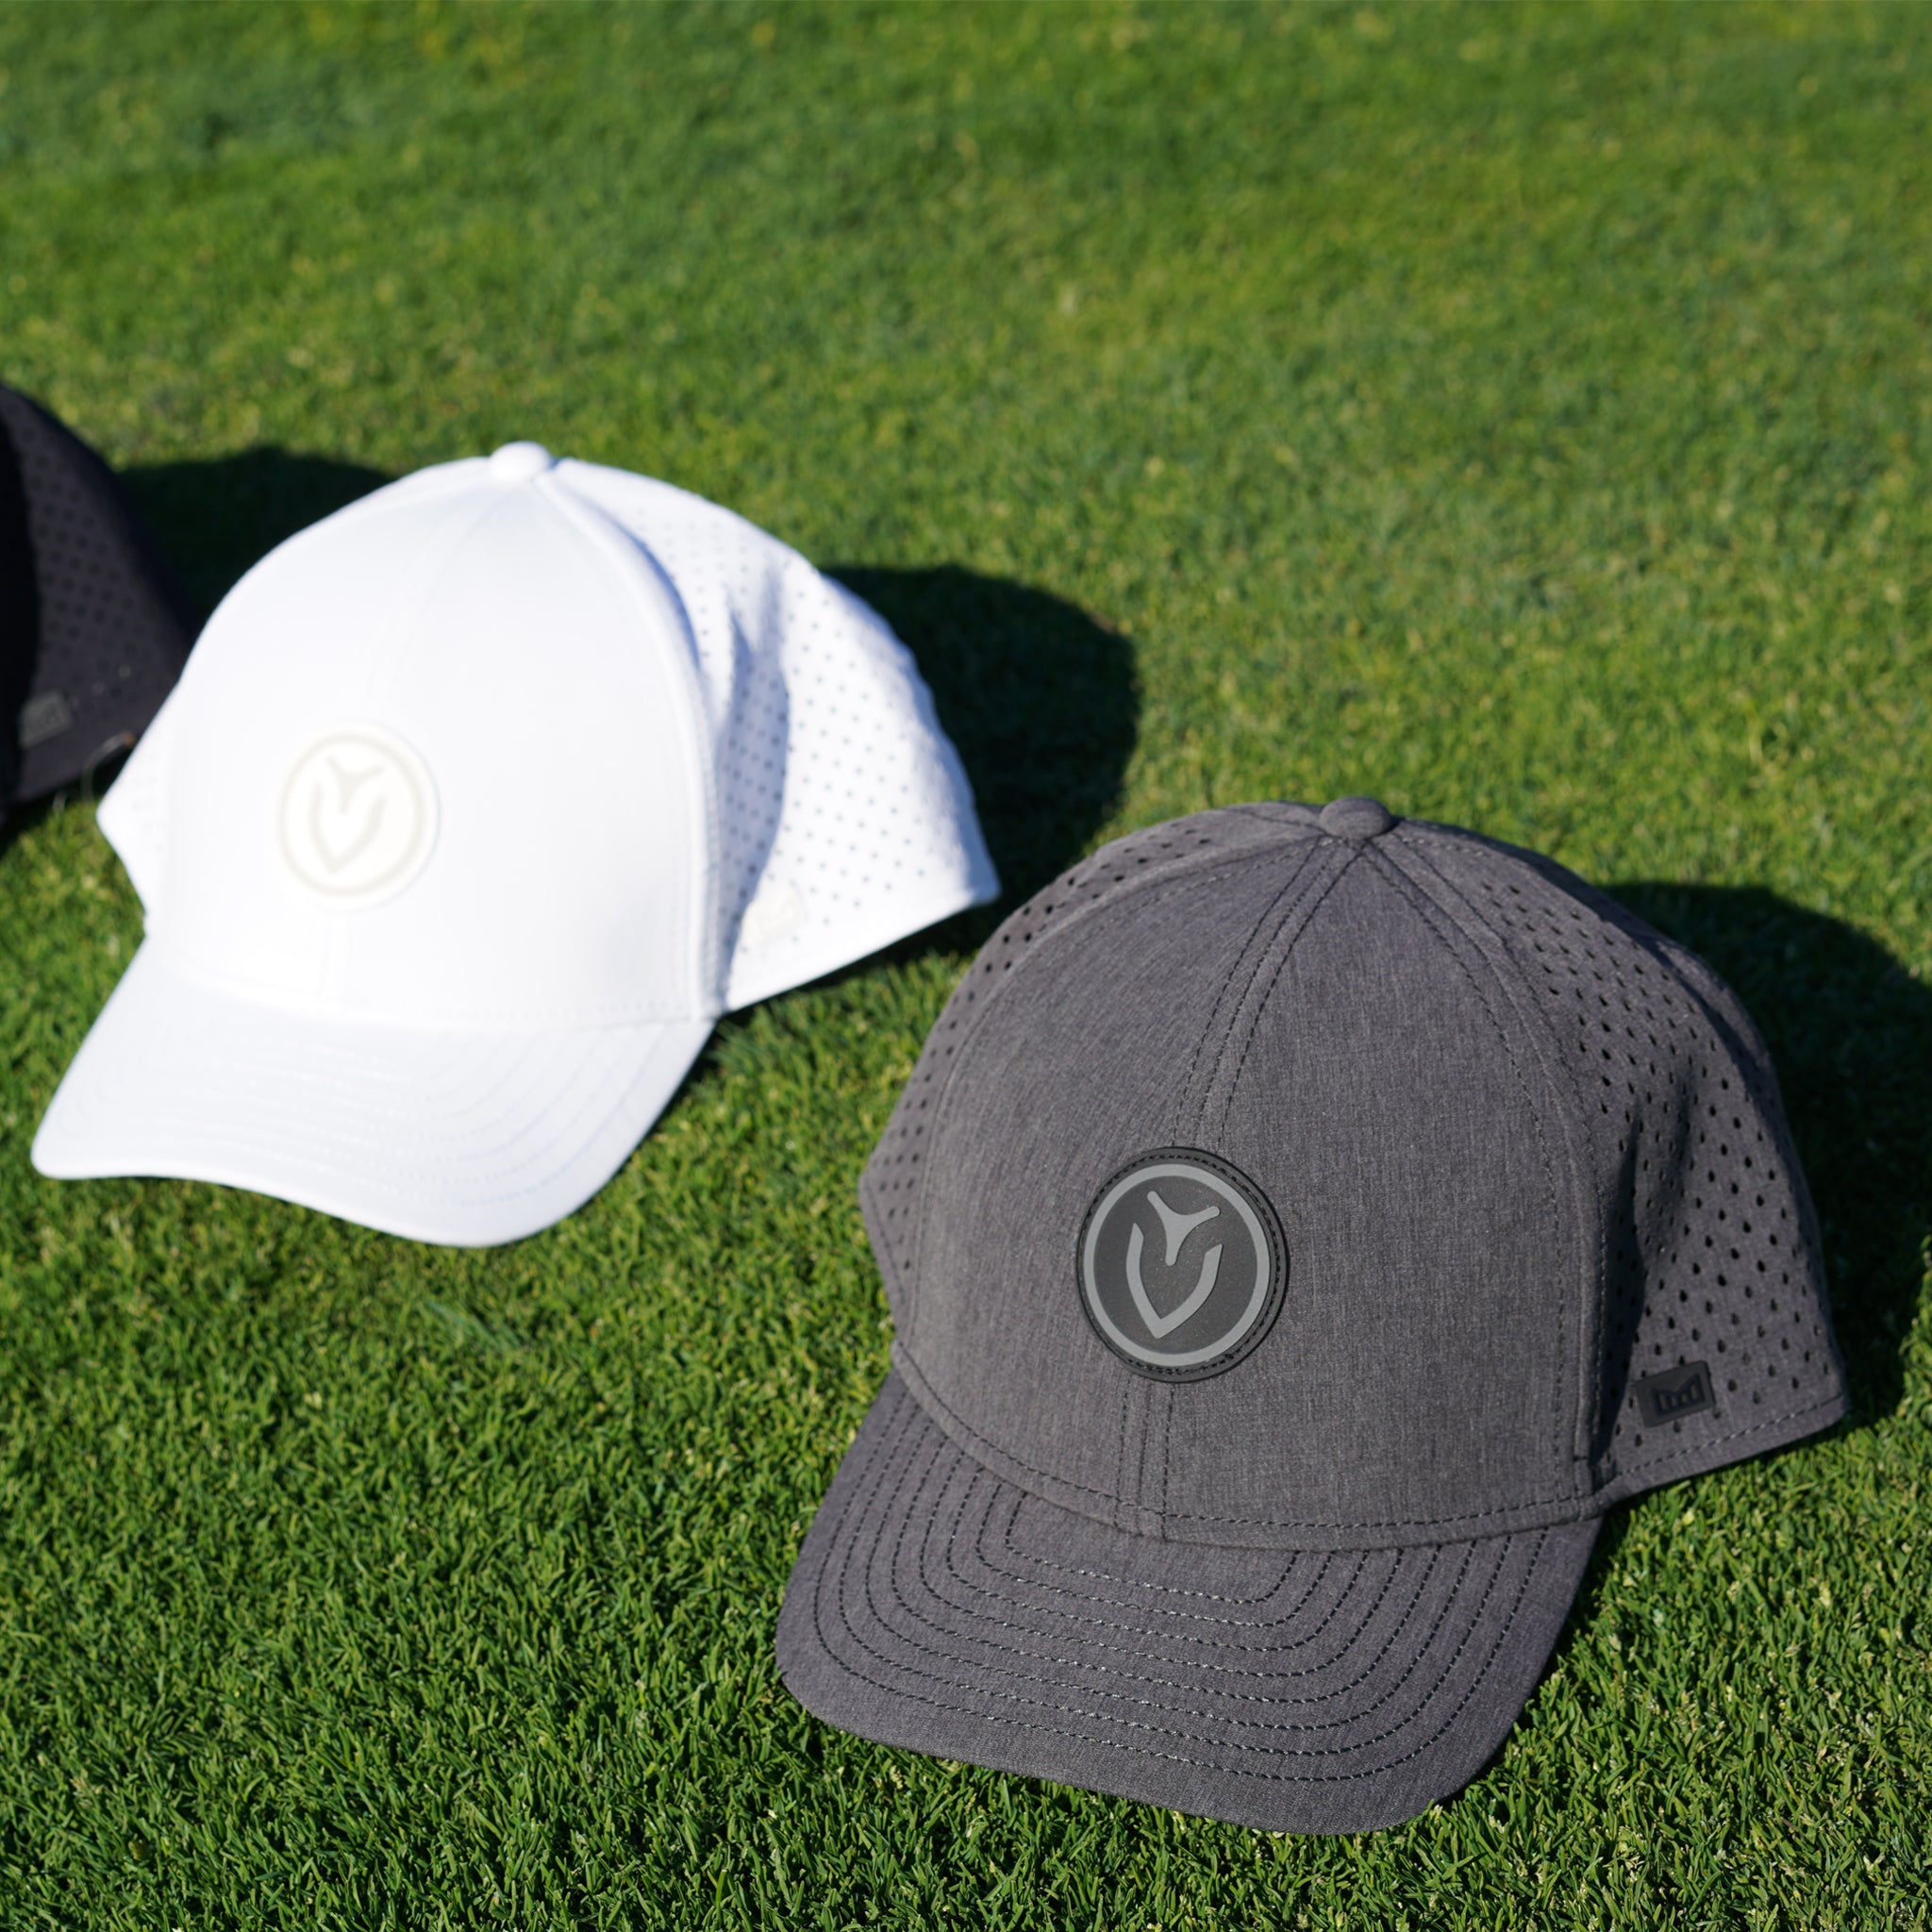 Three hats in different colors, black, white, and gray, next to each other on the grass